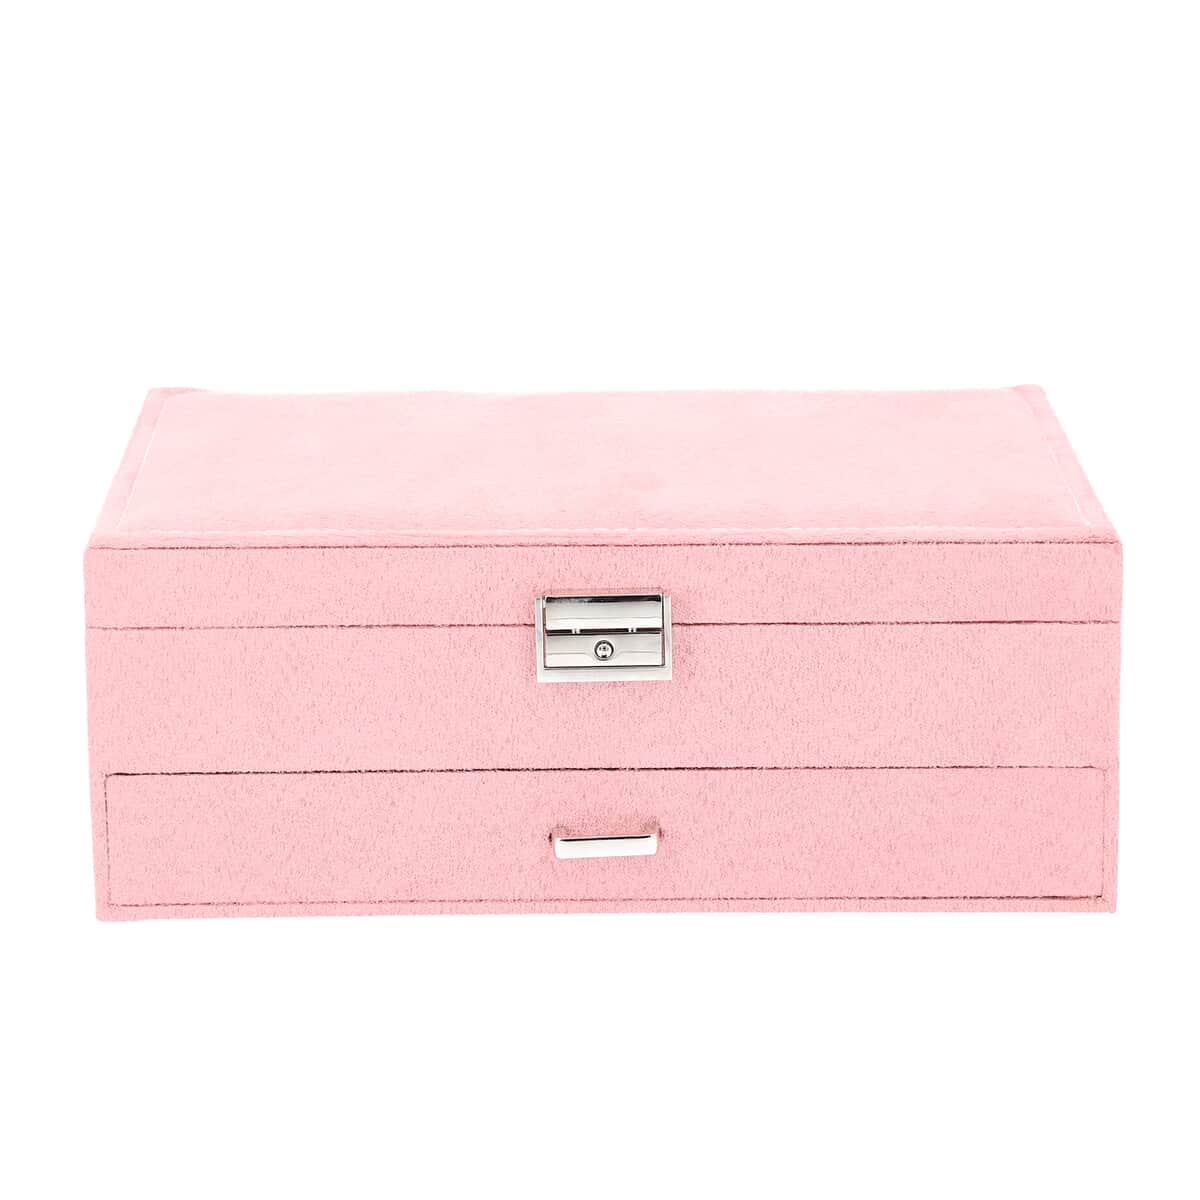 Pink Velvet 2 Layer Jewelry Box with Lock and Key image number 1